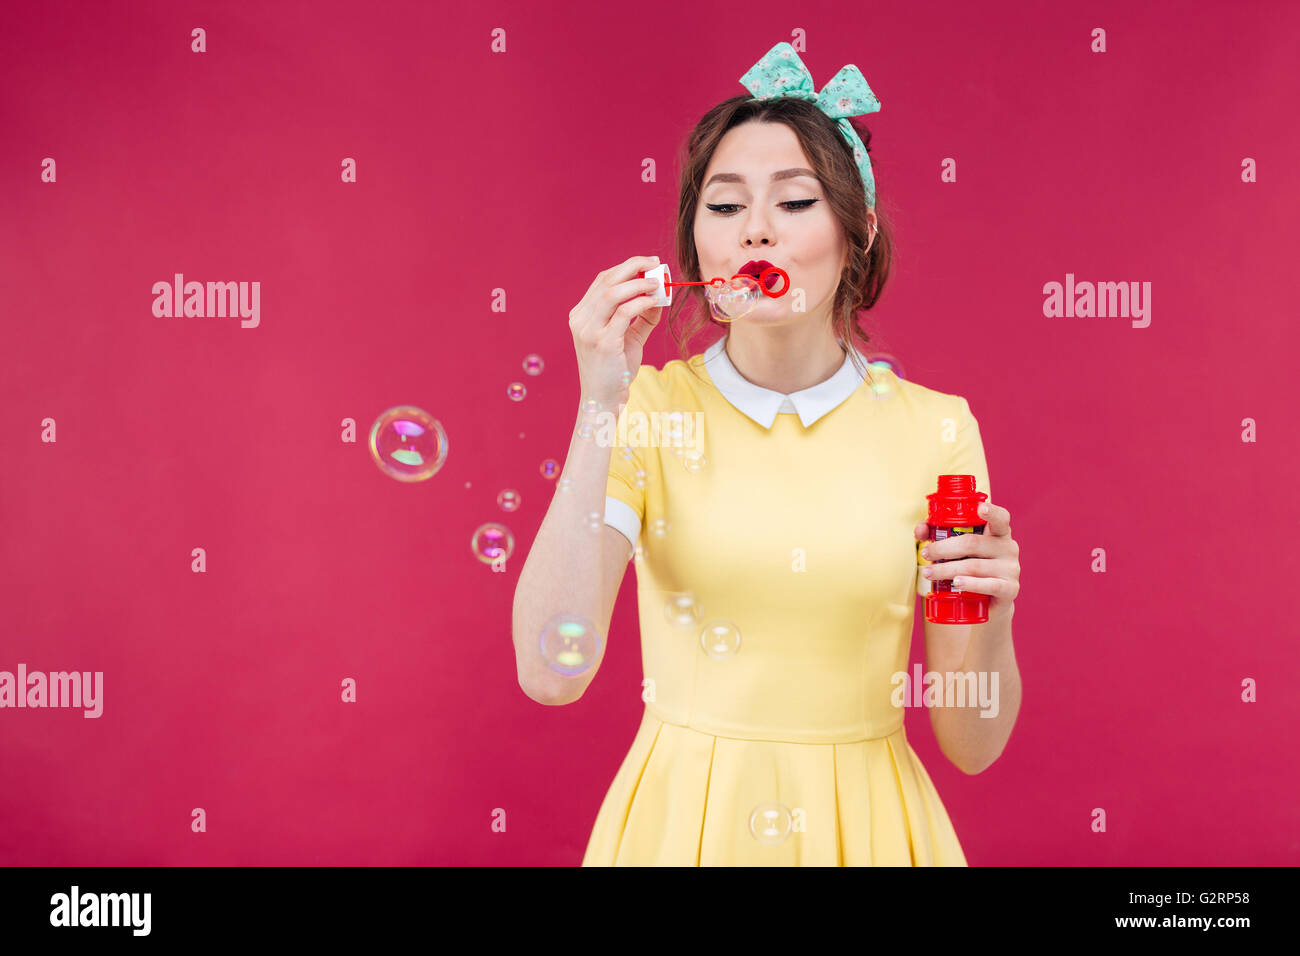 Cute lovely young woman in yellow dress blowing soap bubbles over pink background Stock Photo